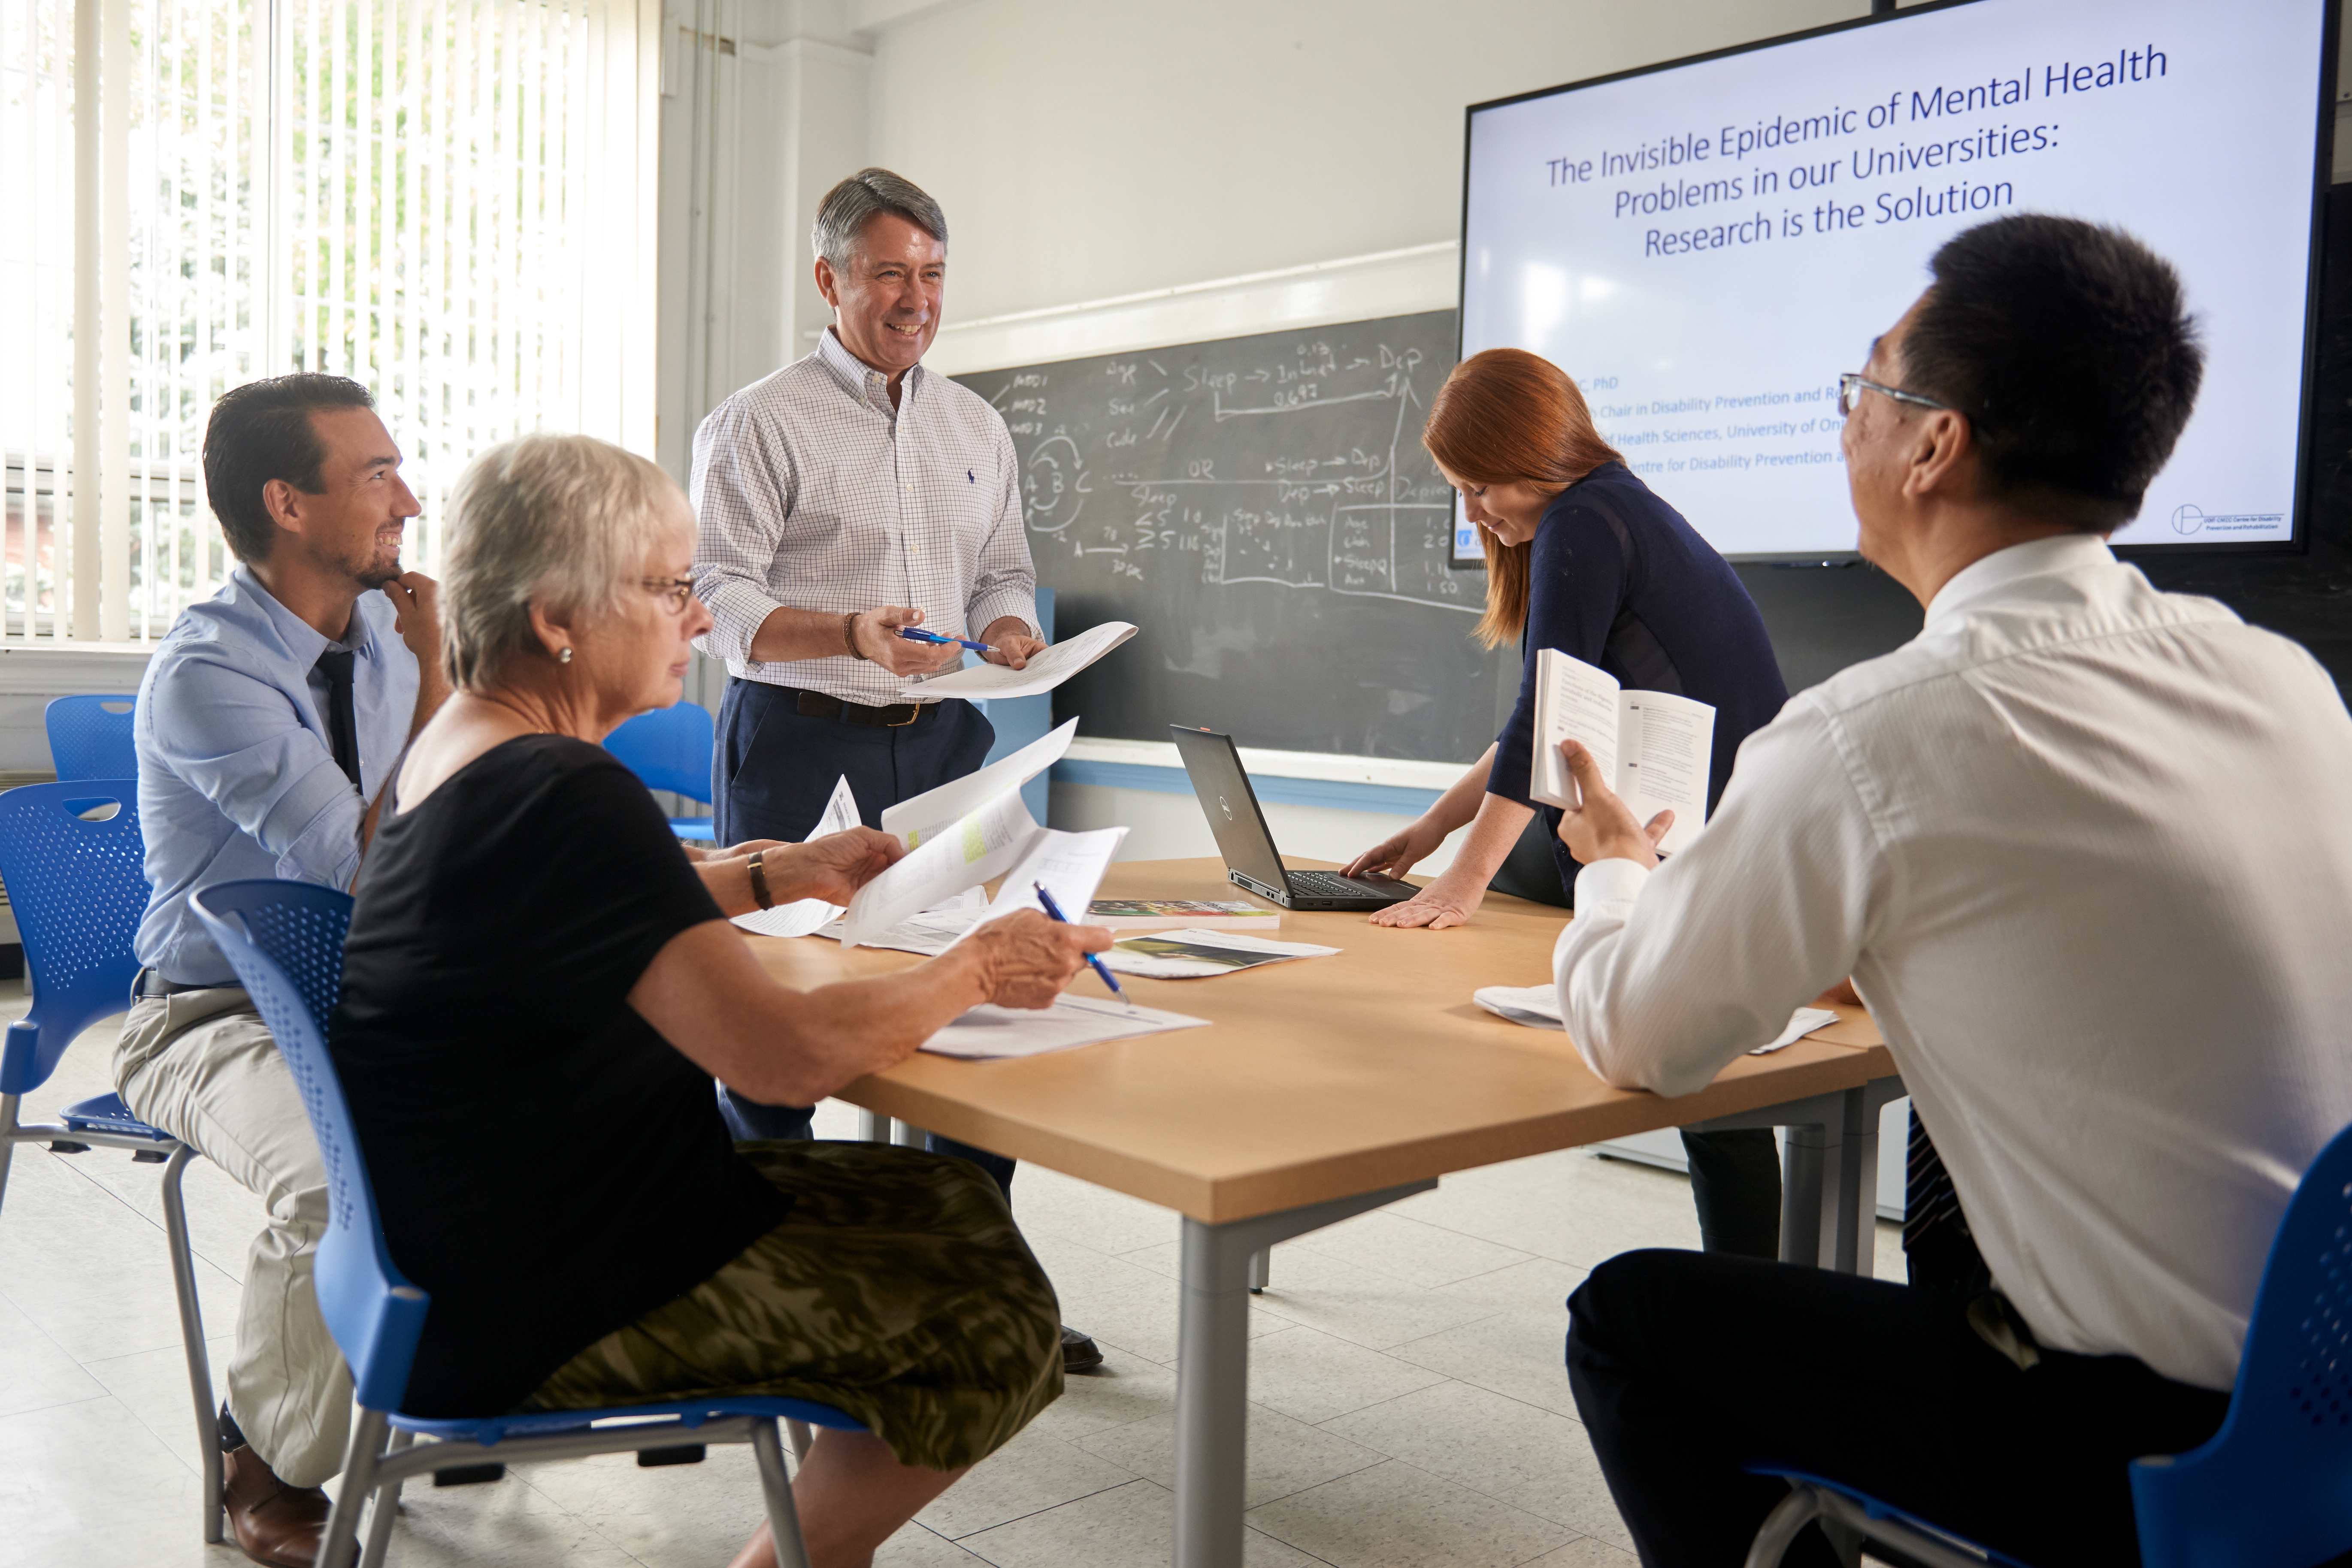 a group of people at a table sitting having a conversation. One person is looking at their laptop, one person is hold a pen and paper and one person is holding a note book. There is a projector with a PowerPoint 